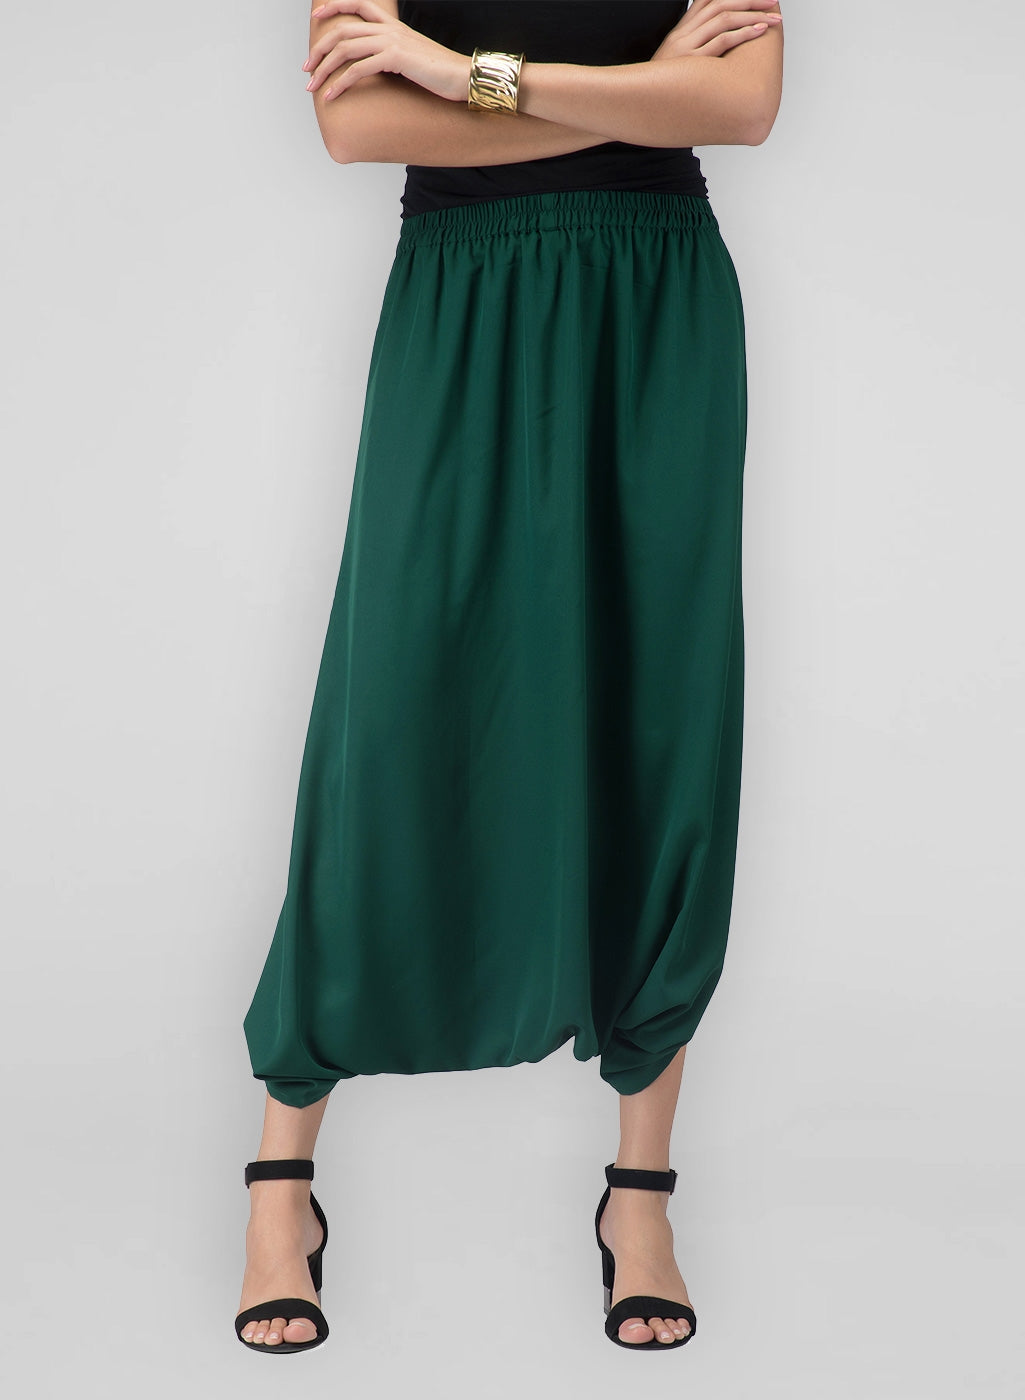 A pair of fusion cowl pants for women to dress up like a trendy diva